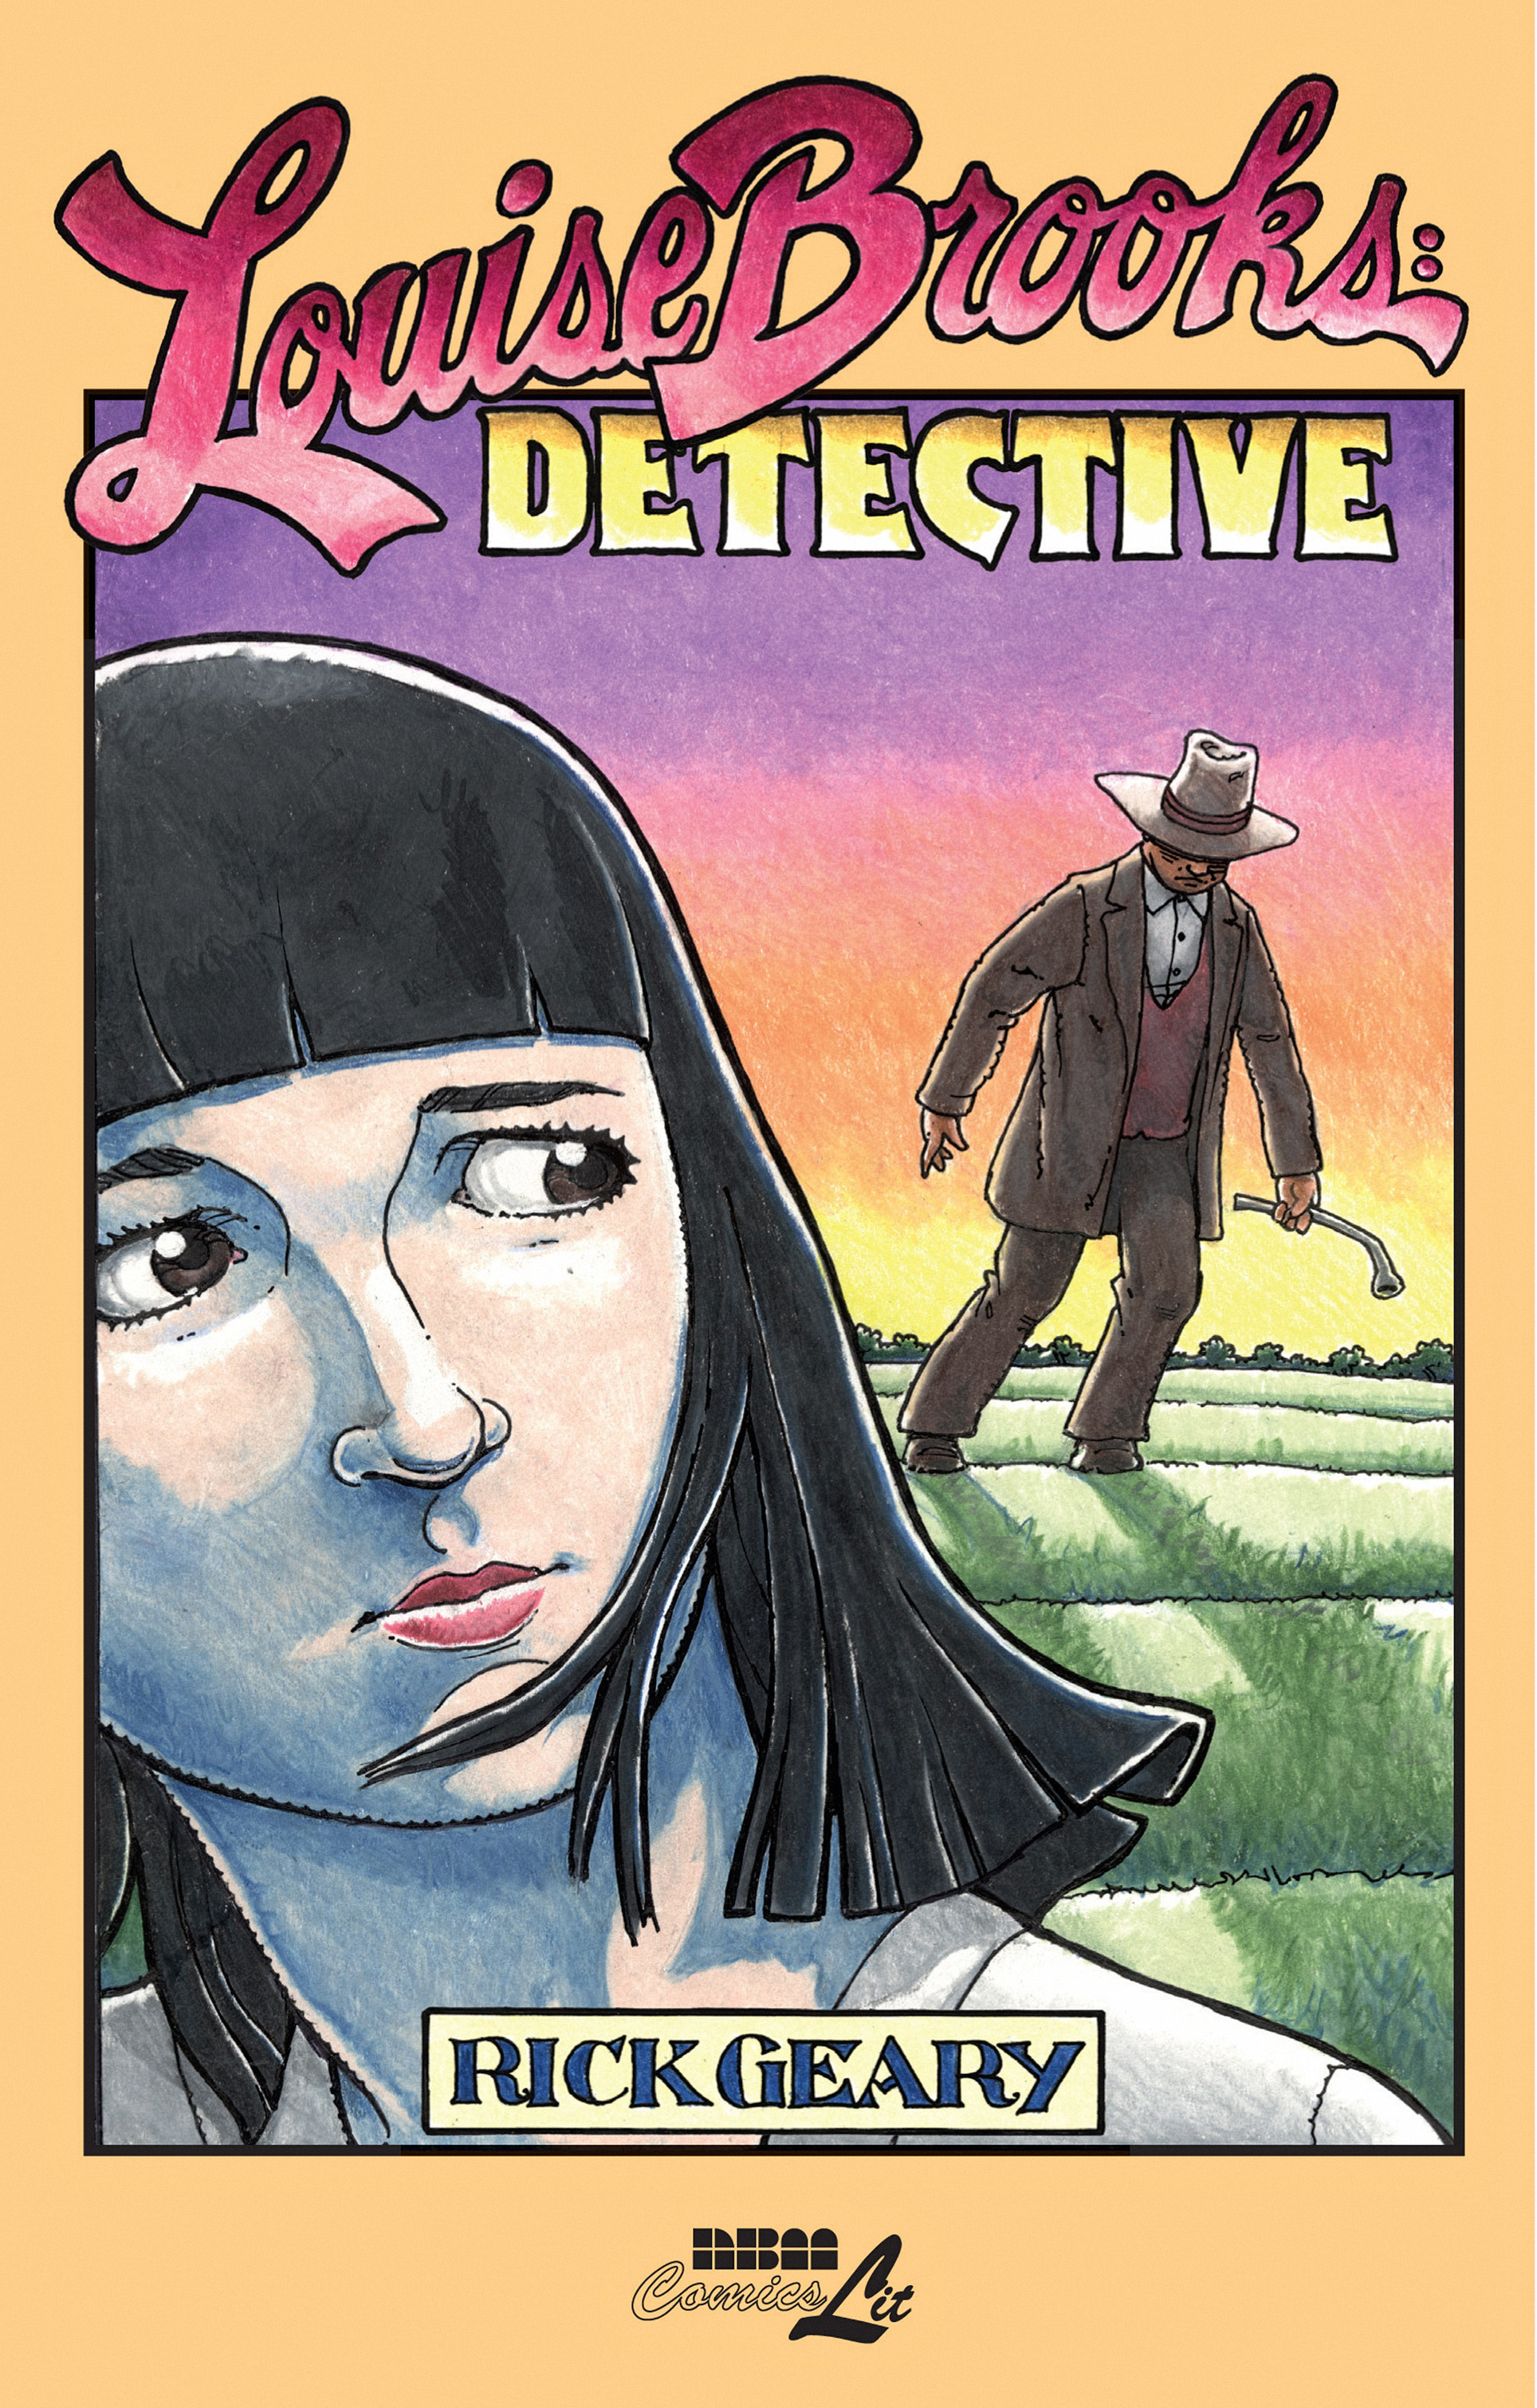 Read online Louise Brooks: Detective comic -  Issue # TPB - 1